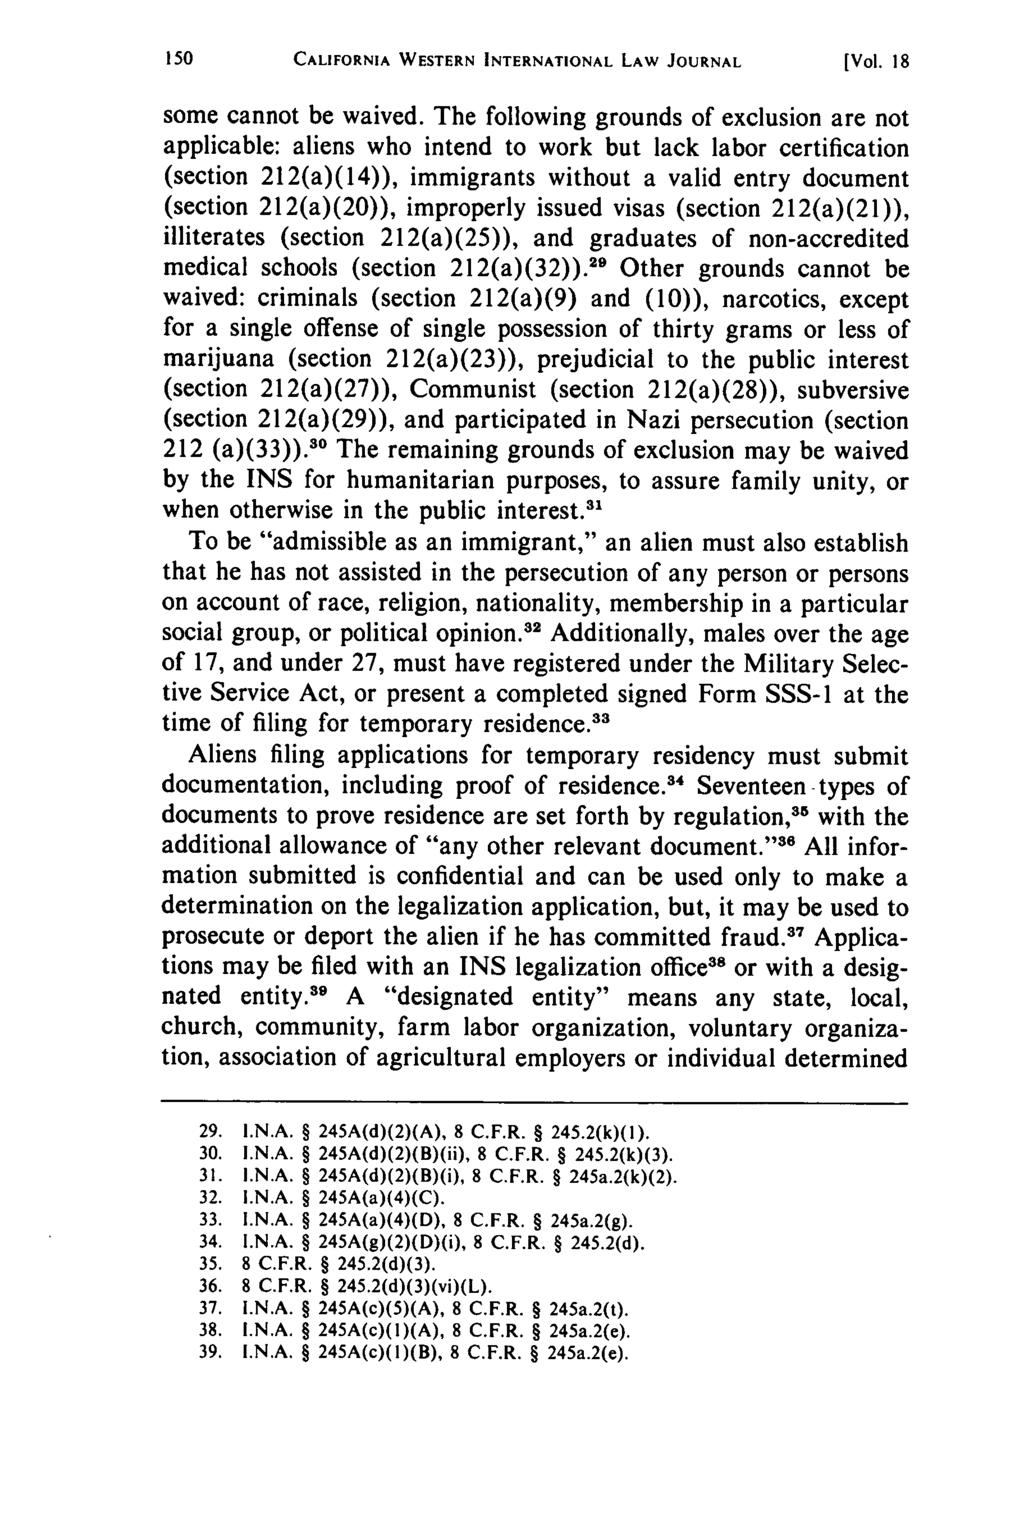 California Western International Law Journal, Vol. 18 [1987], No. 1, Art. 19 CALIFORNIA WESTERN INTERNATIONAL LAW JOURNAL [Vol. 18 some cannot be waived.